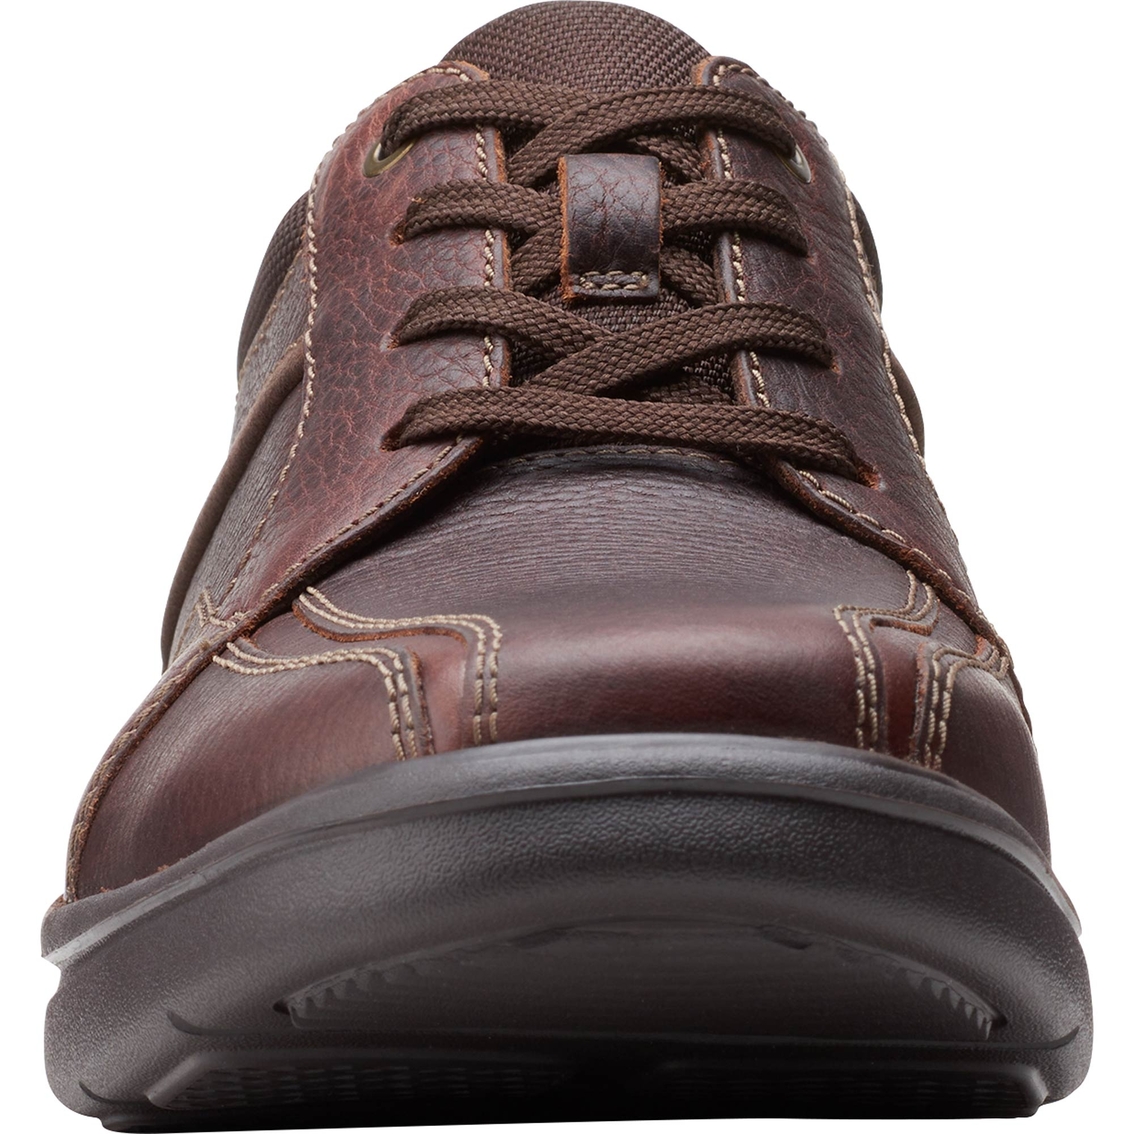 Clarks Bradley Walking Shoes | Casuals | Shoes | Shop The Exchange